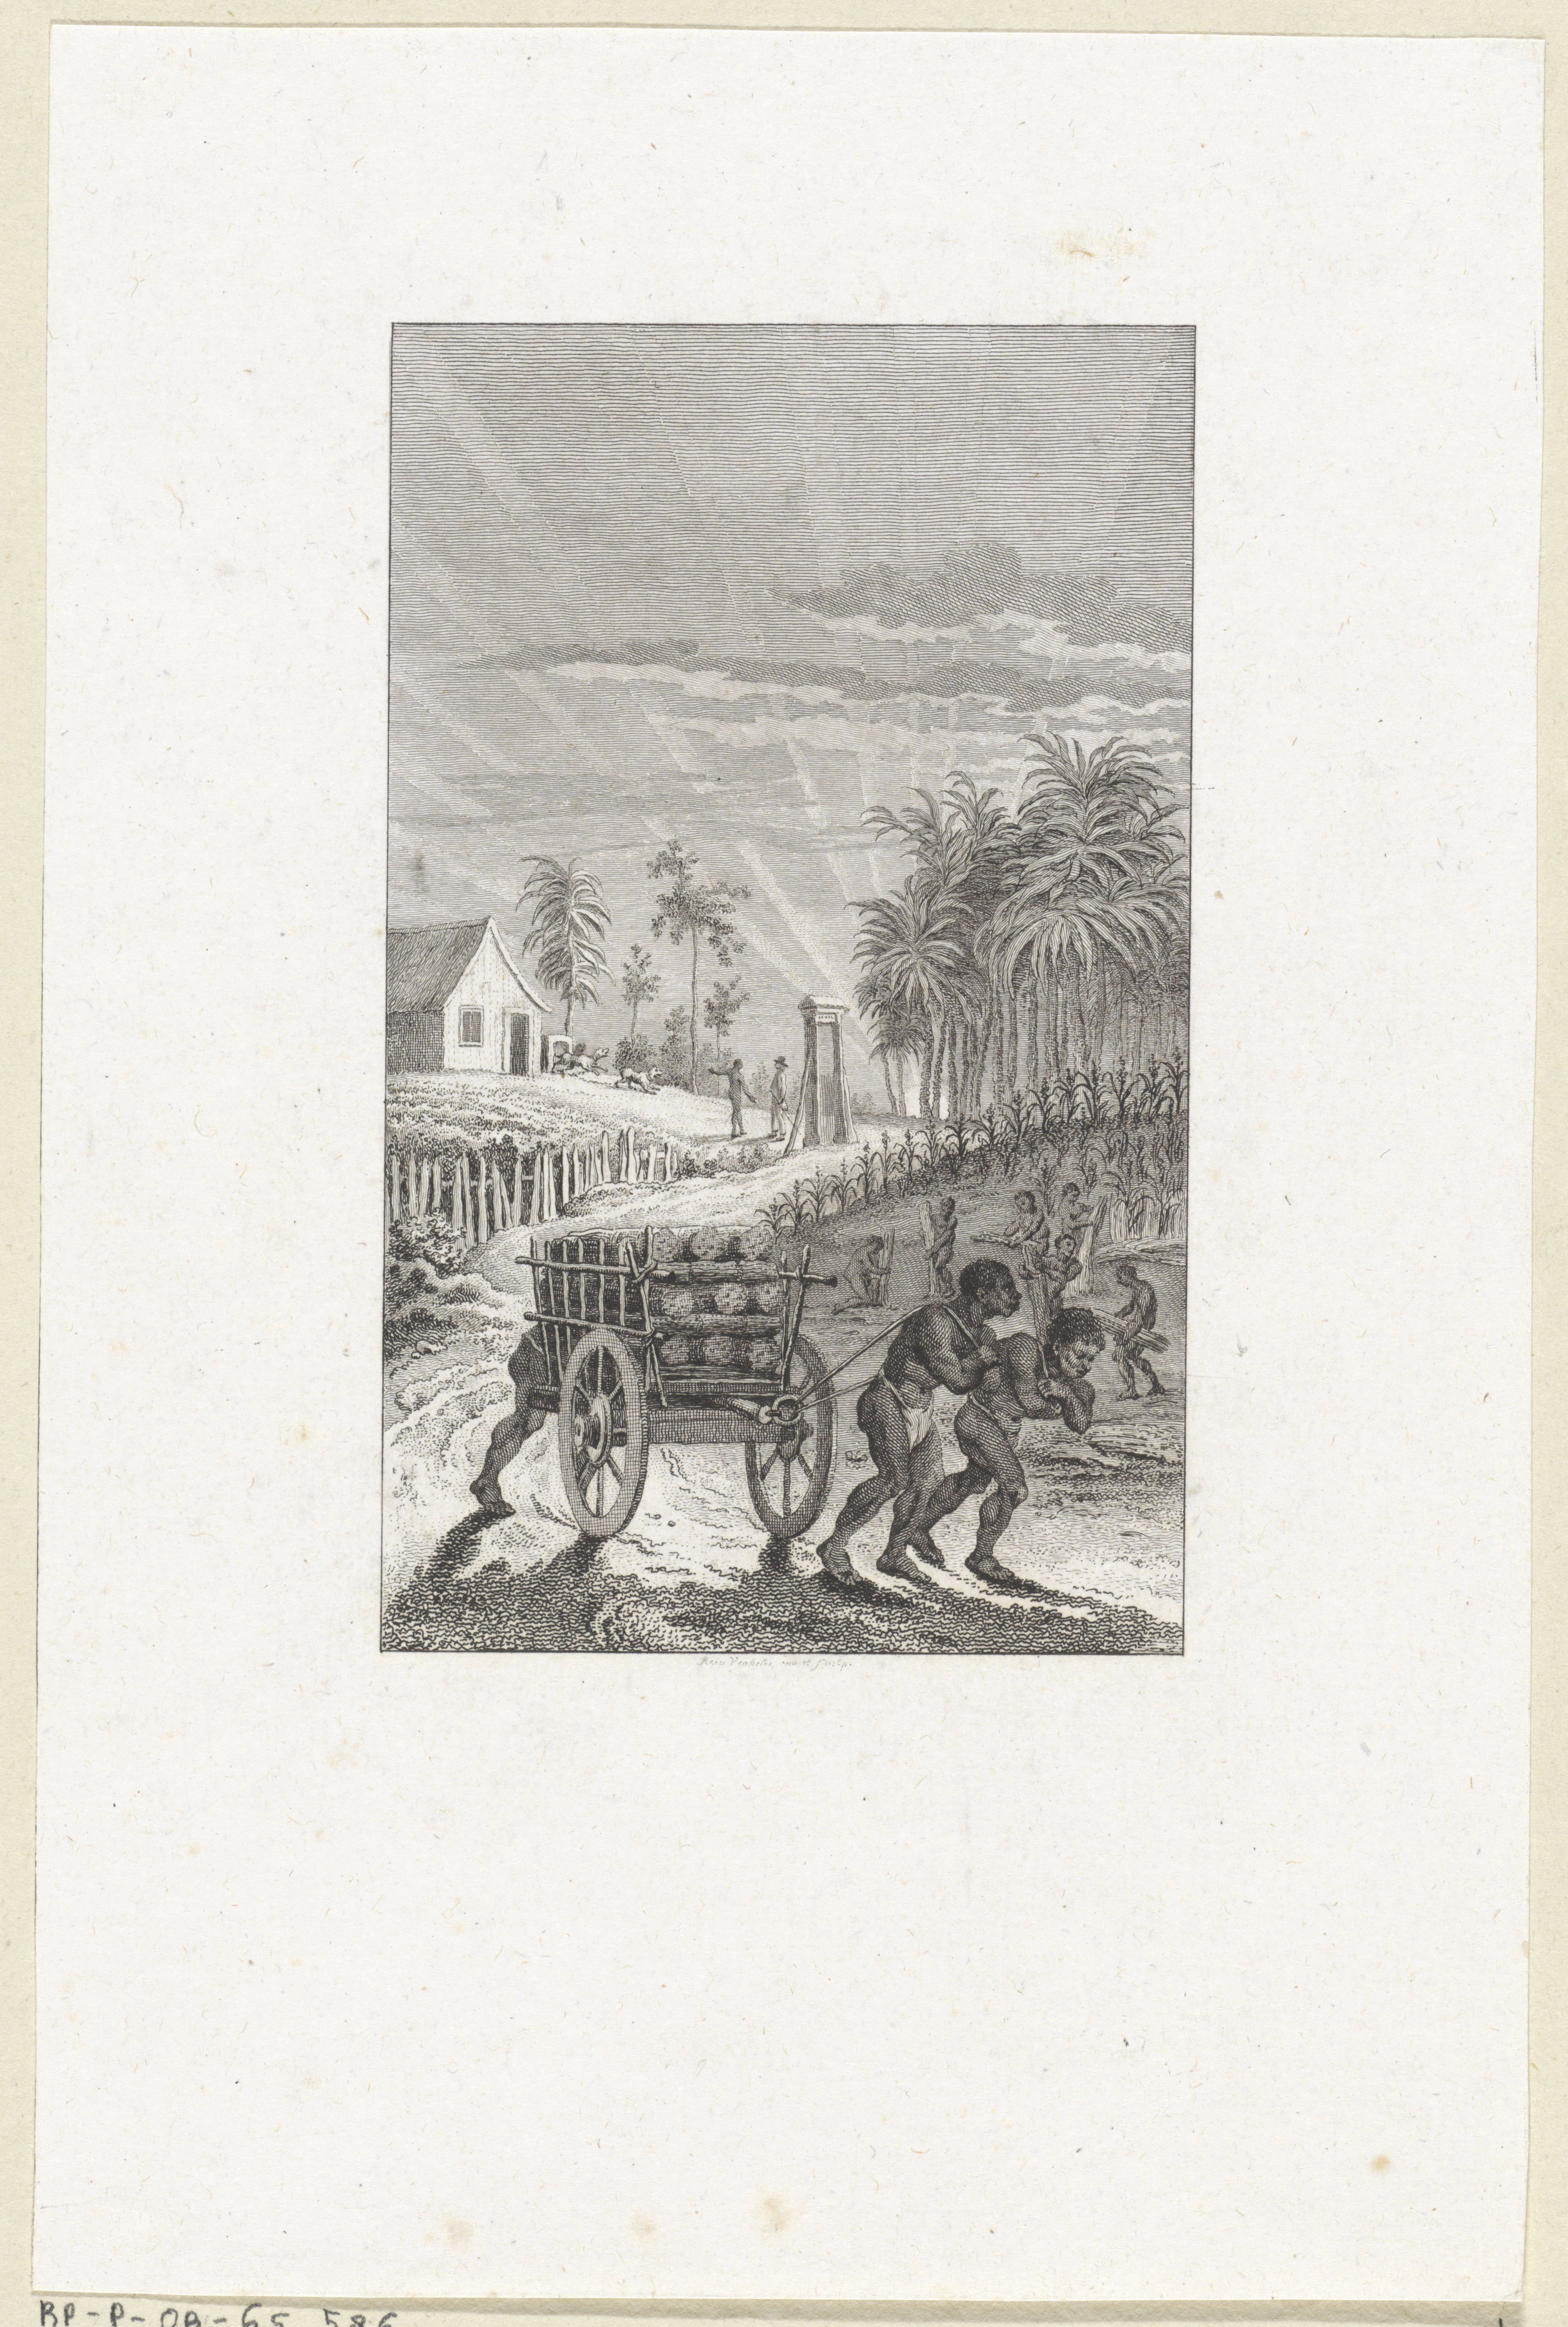 A black and white engraving shows an idyllic plantation landscape. In the background, a white colonist walks towards a house where he is greeted by a dark-skinned worker and two dogs.